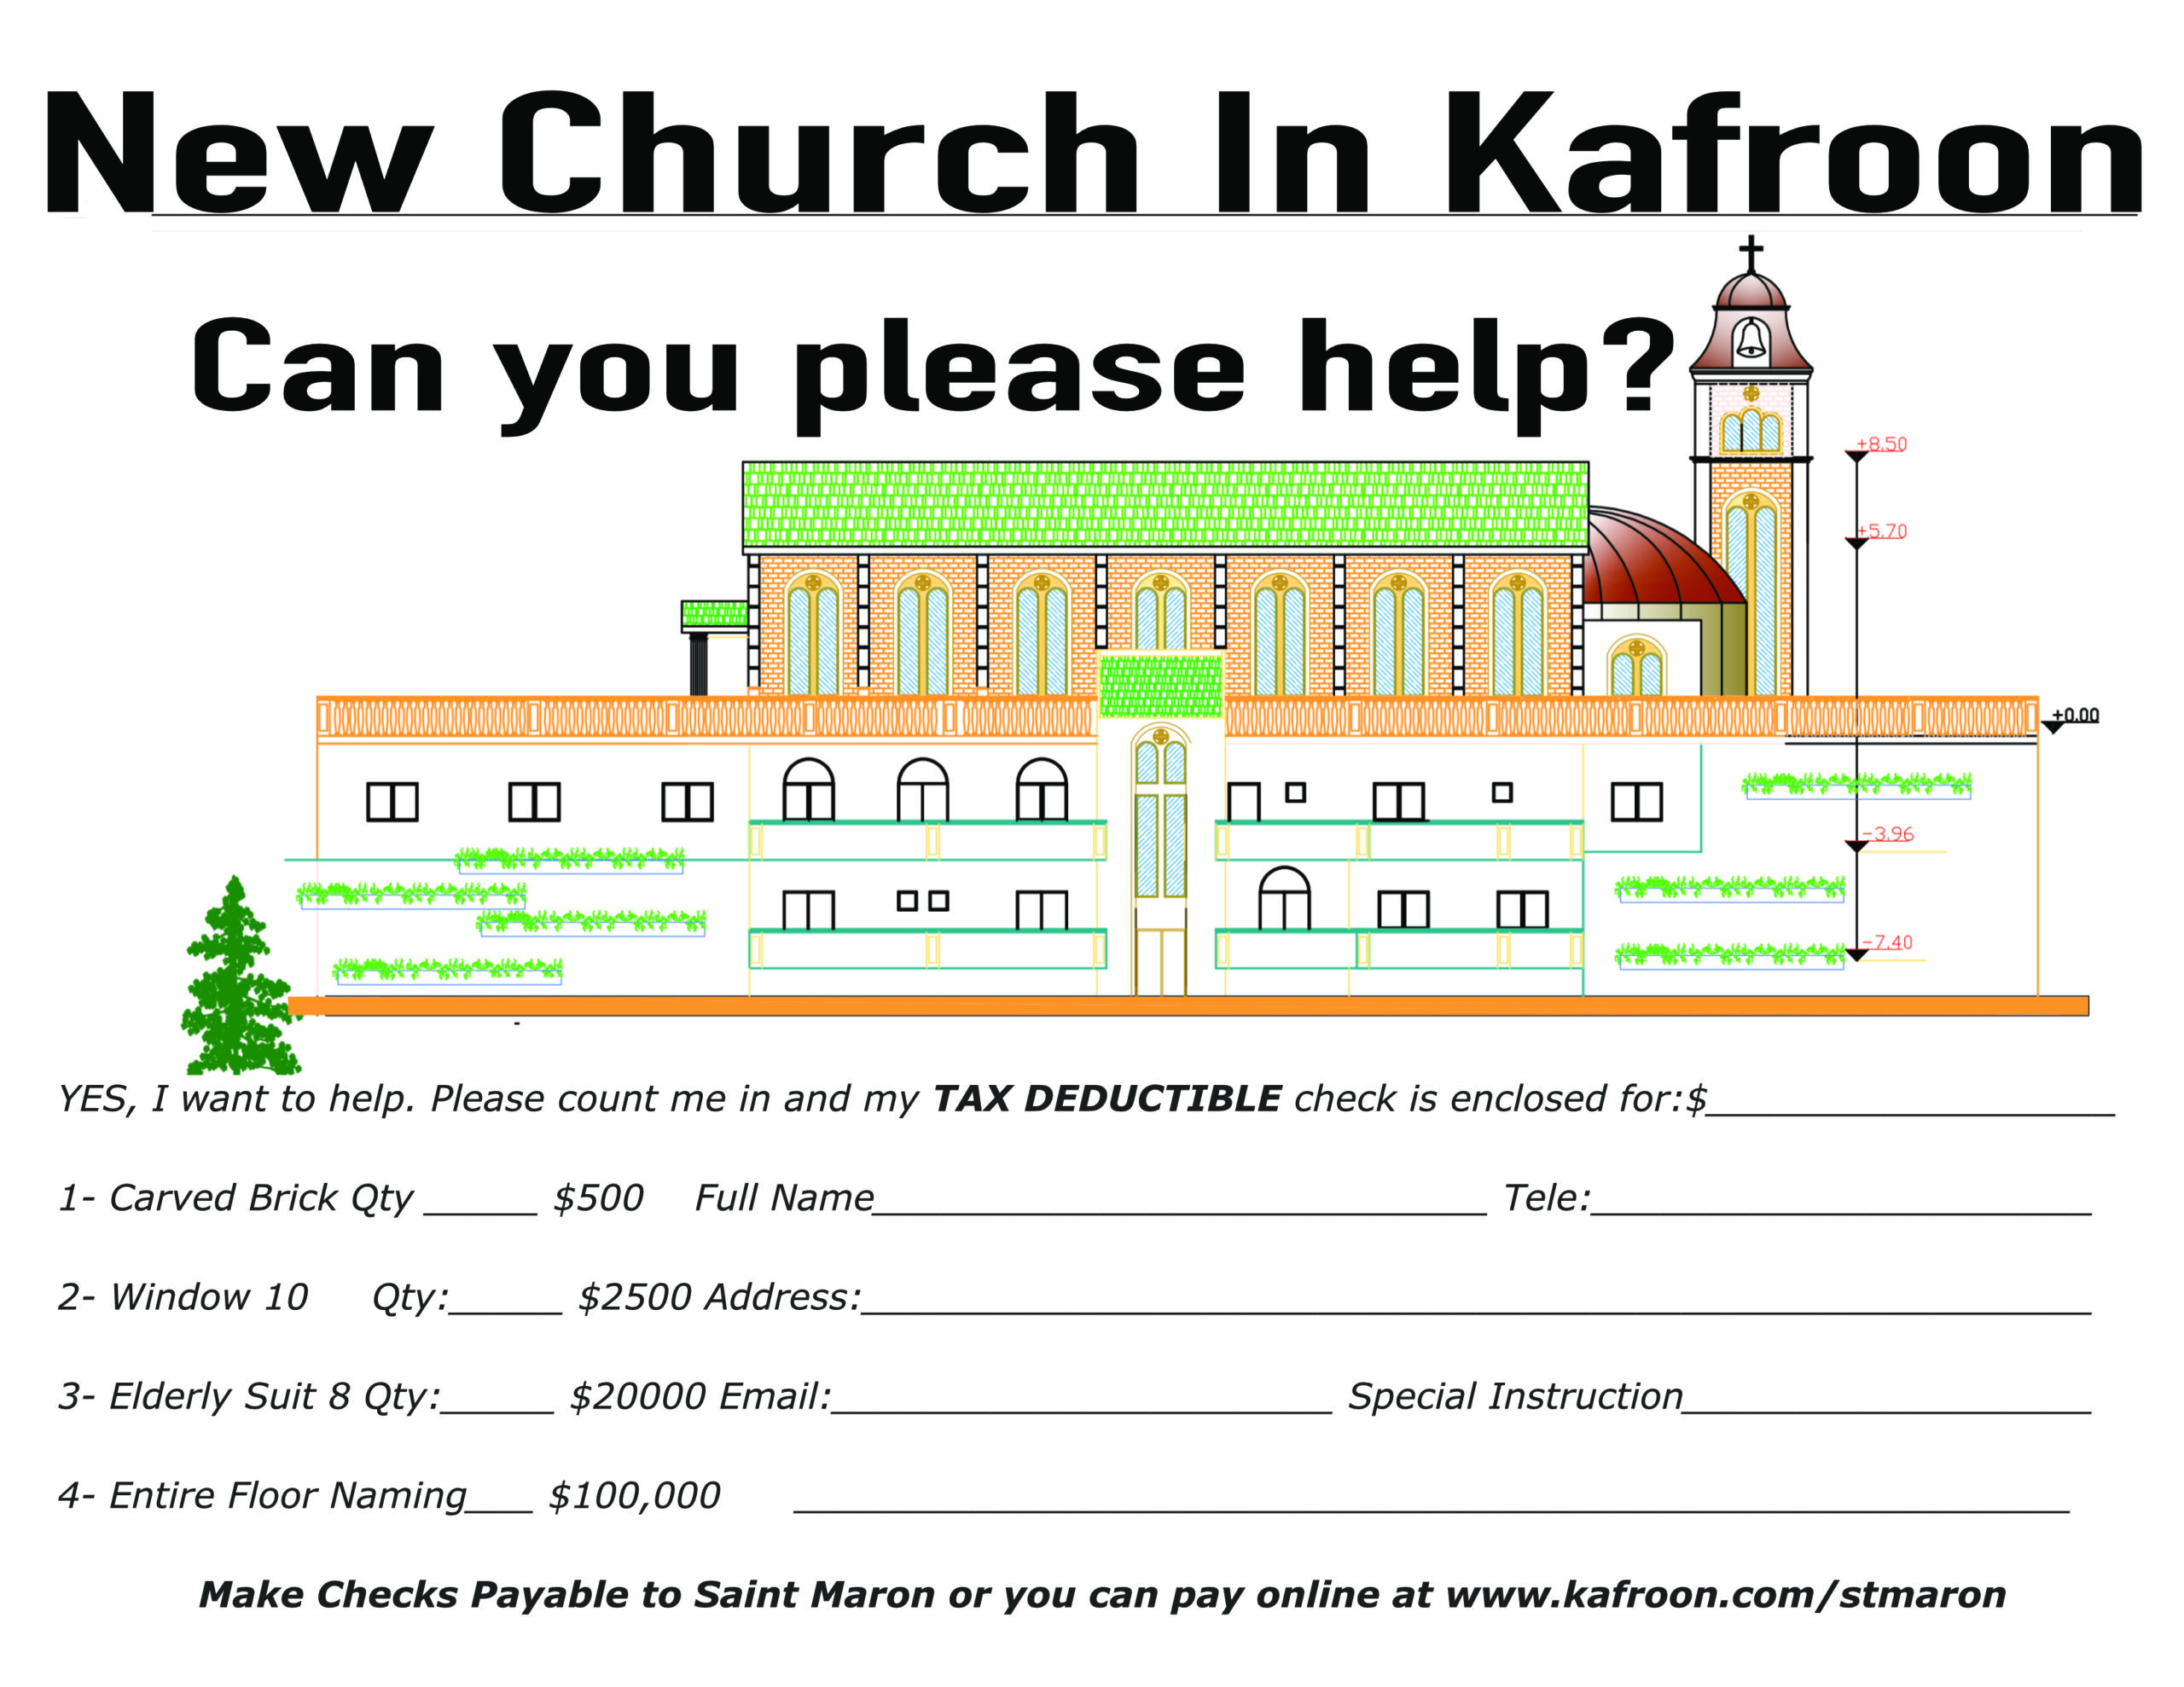 Building a New Church in Kafroon: A Community Project